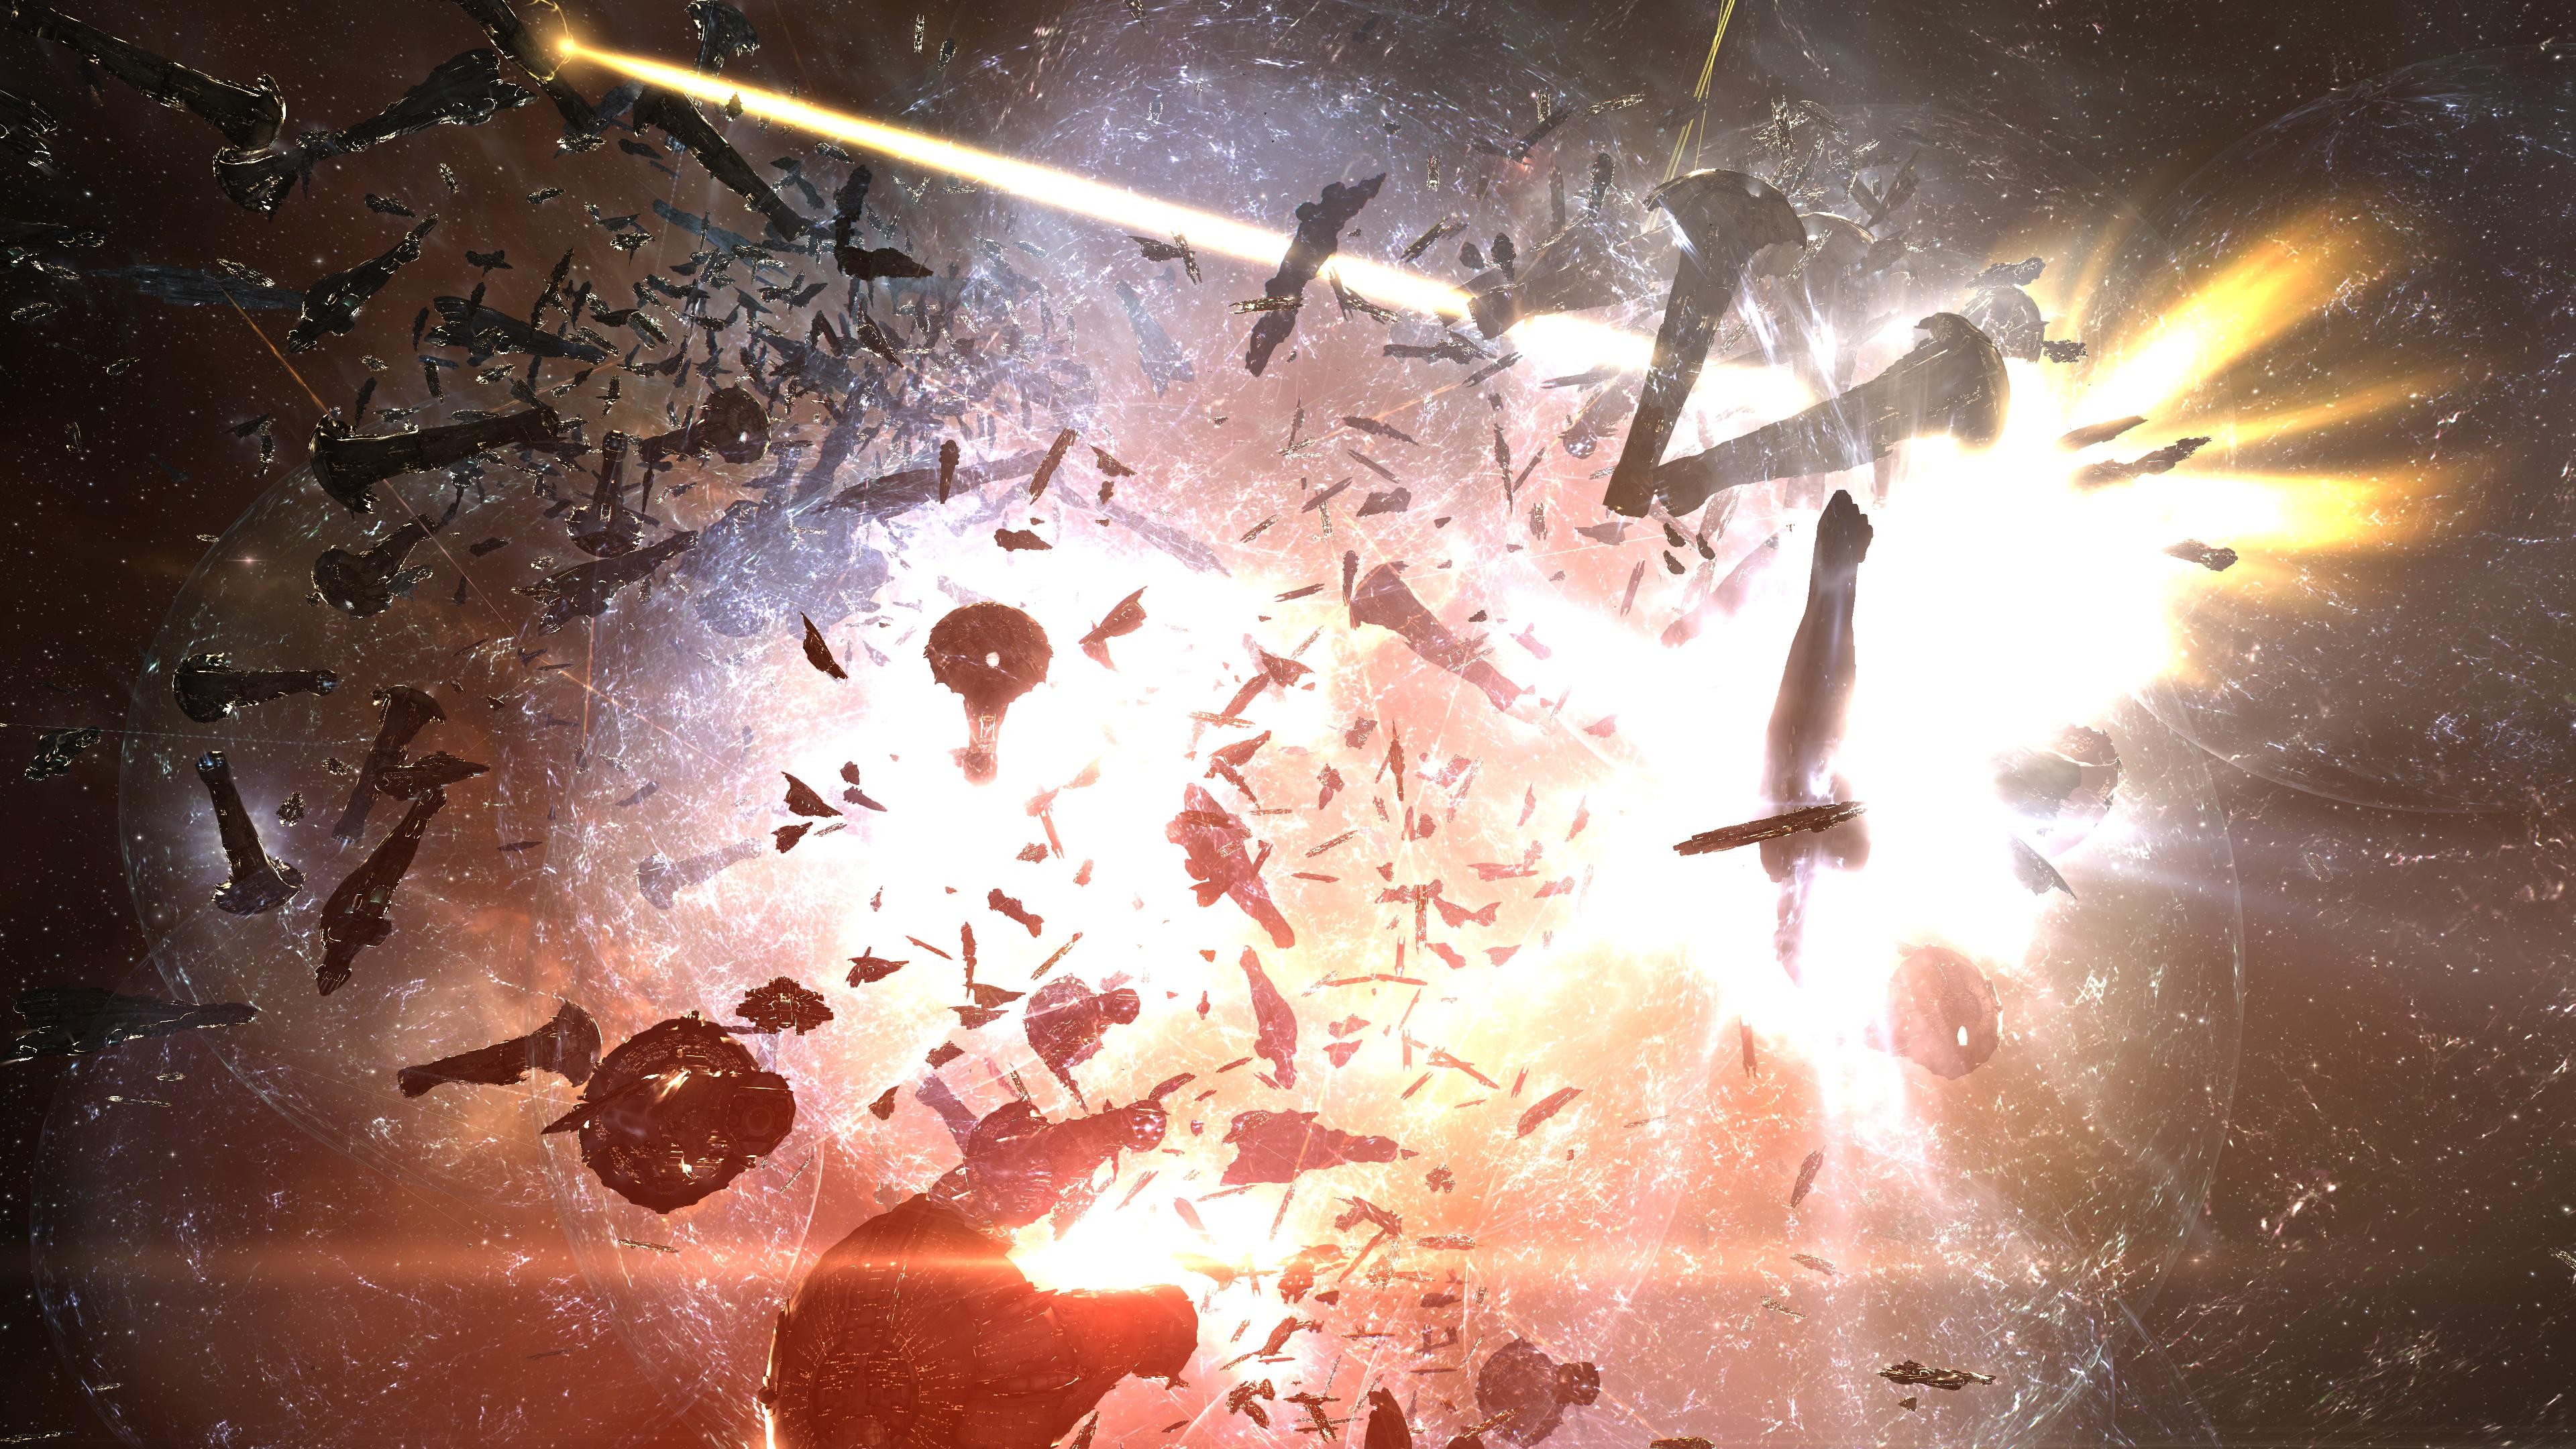 General 3840x2160 space spaceship space battle video games PC gaming EVE Online science fiction